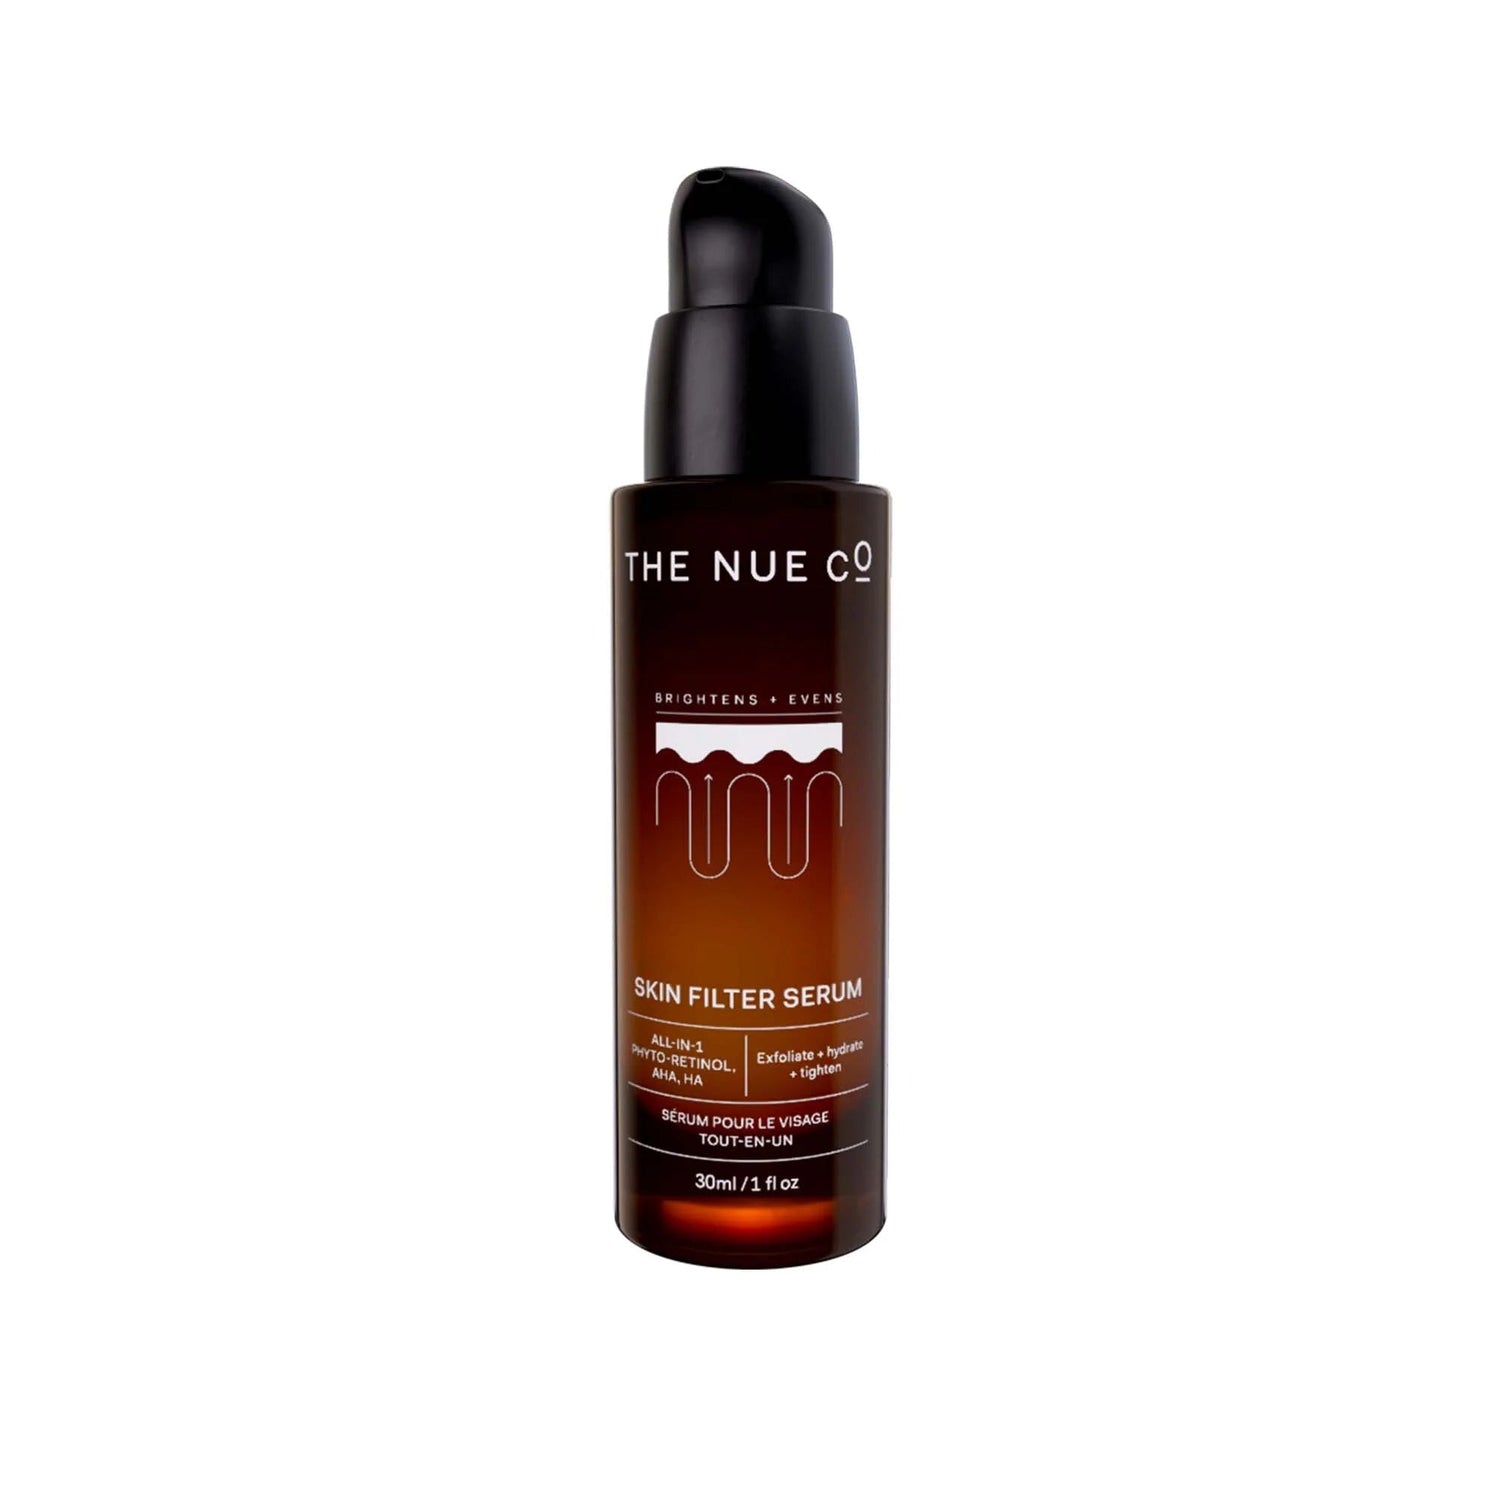 SKIN FILTER SERUM - 3 MONTH Subscription Only The Nue Co. 